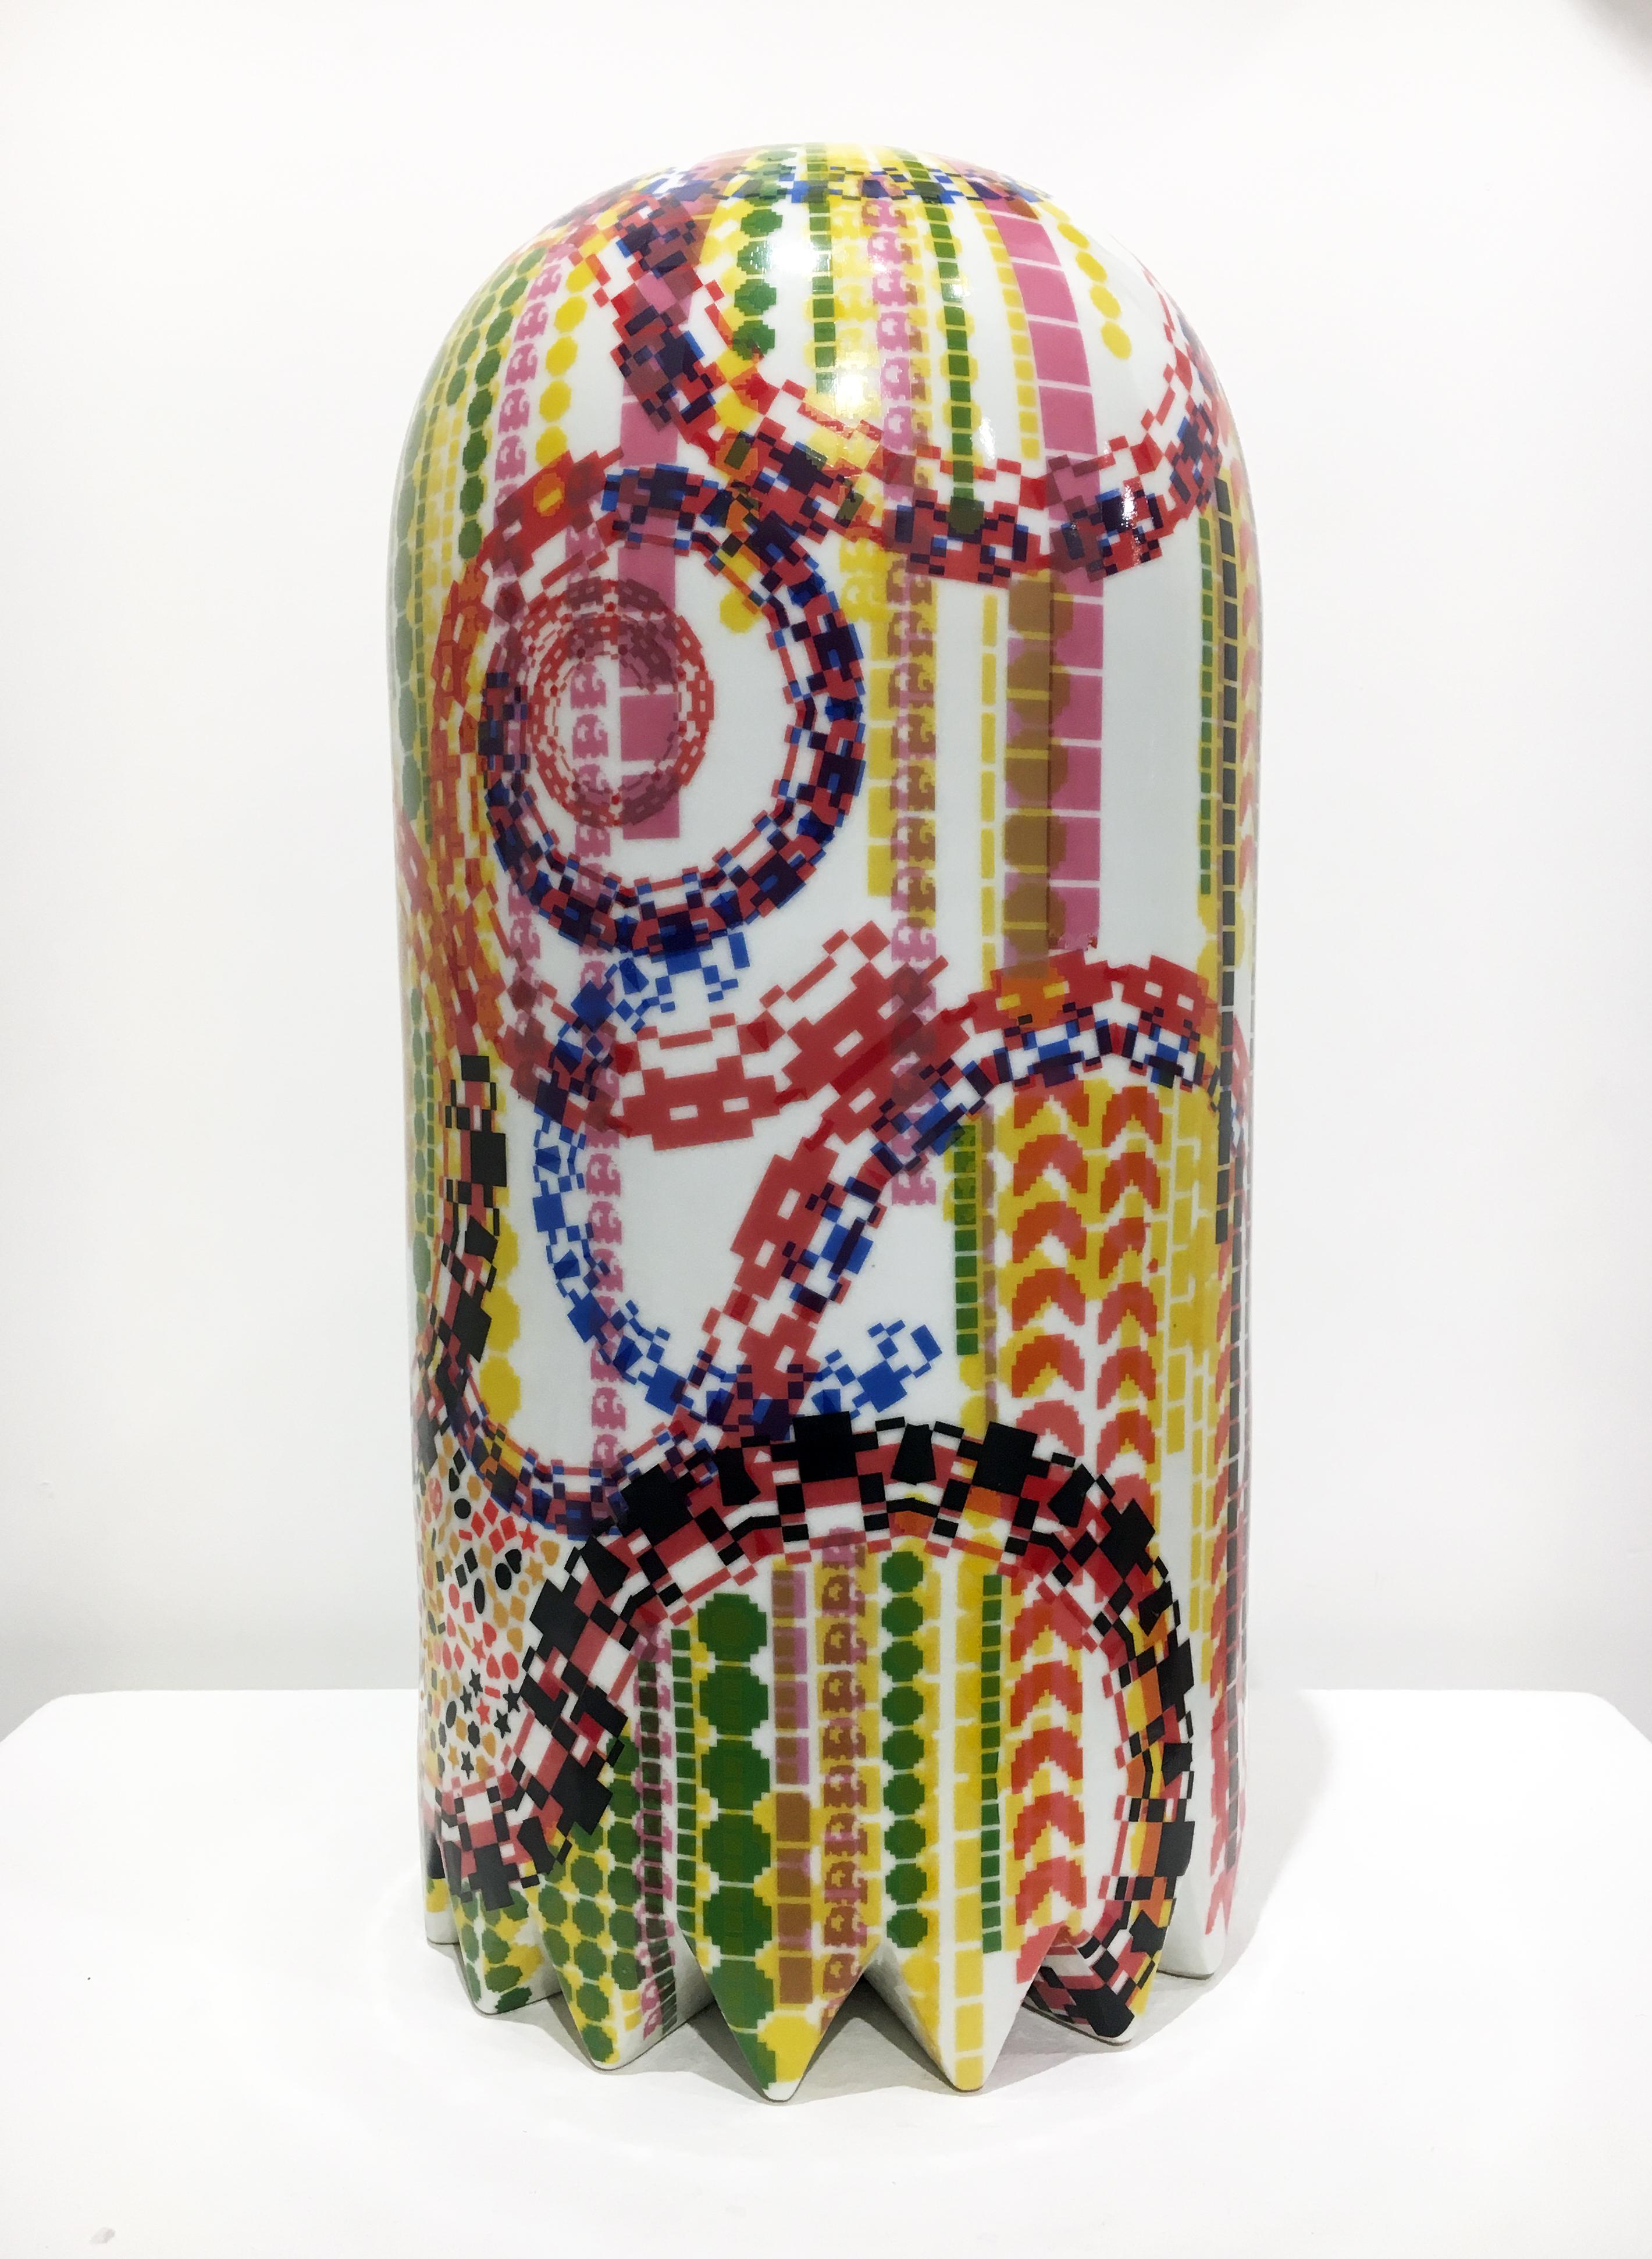 Contemporary Ceramic Sculpture with Colorful Decal Pattern, Porcelain with Glaze